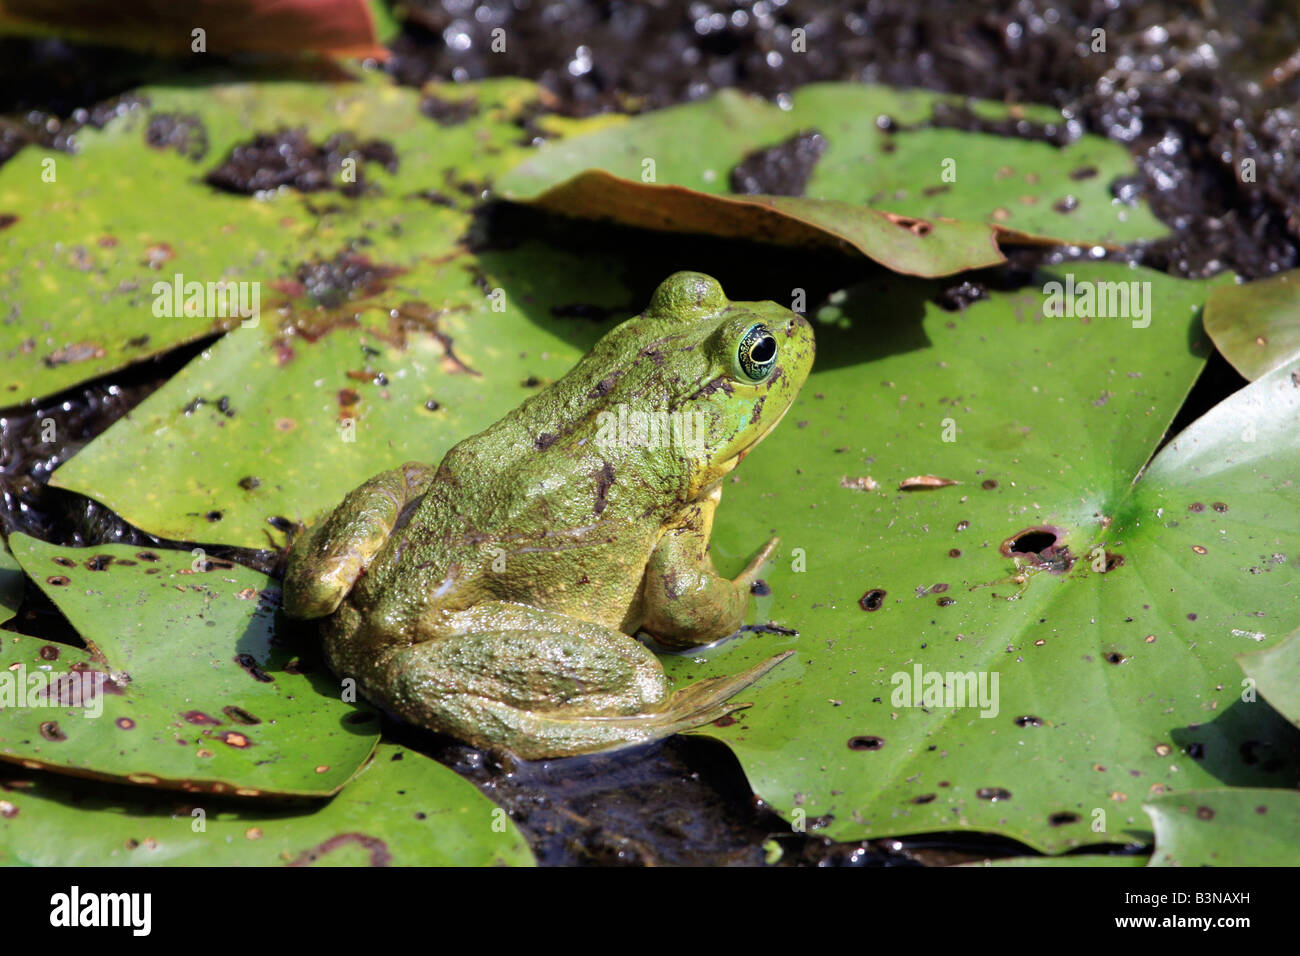 Bullfrog sitting on a lilly pad Stock Photo